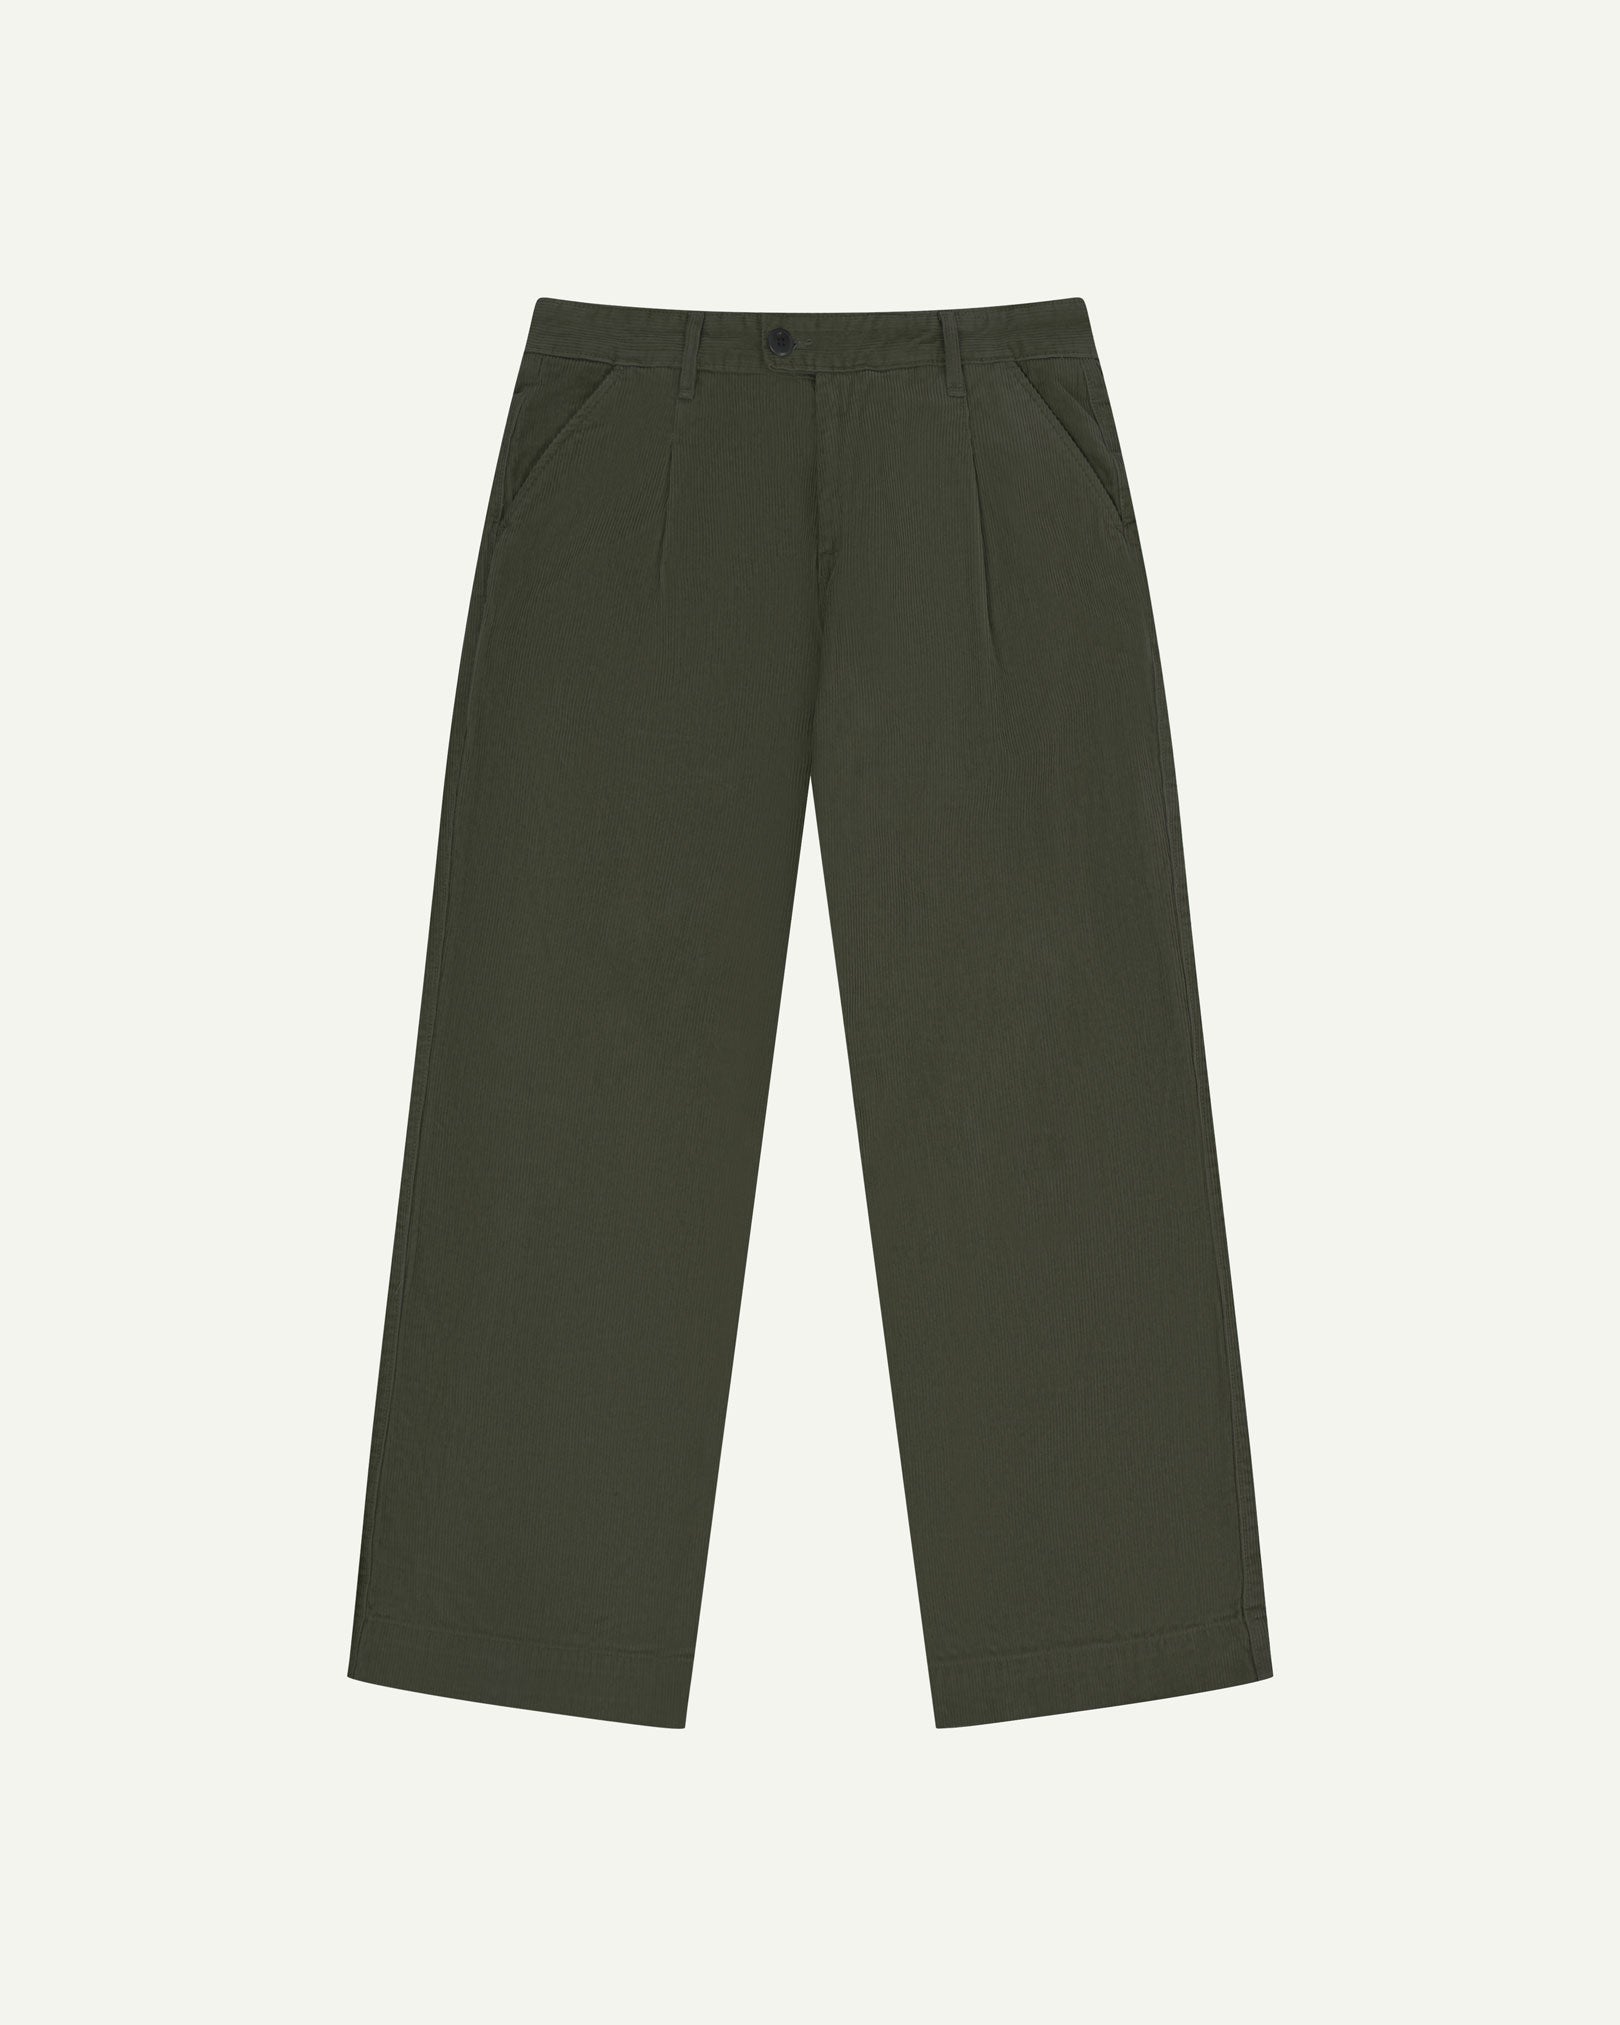 Front flat view of Uskees cord boat pants in vine green. Showing Corozo button fastening and wide leg fit.